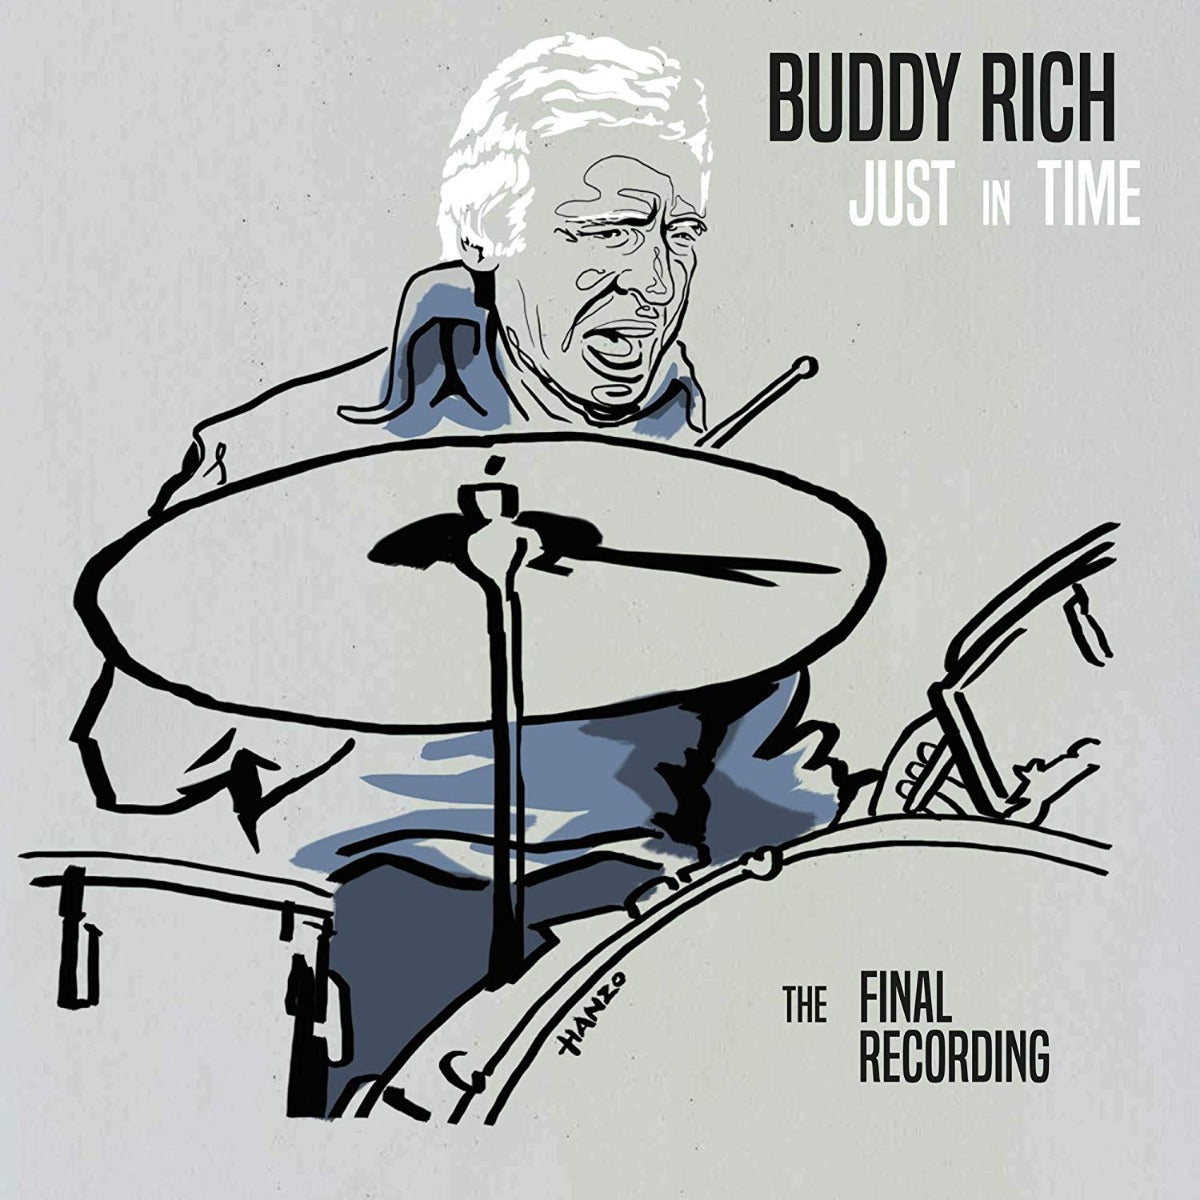 Buddy Rich Just In Time - The Final Recording Vinyl